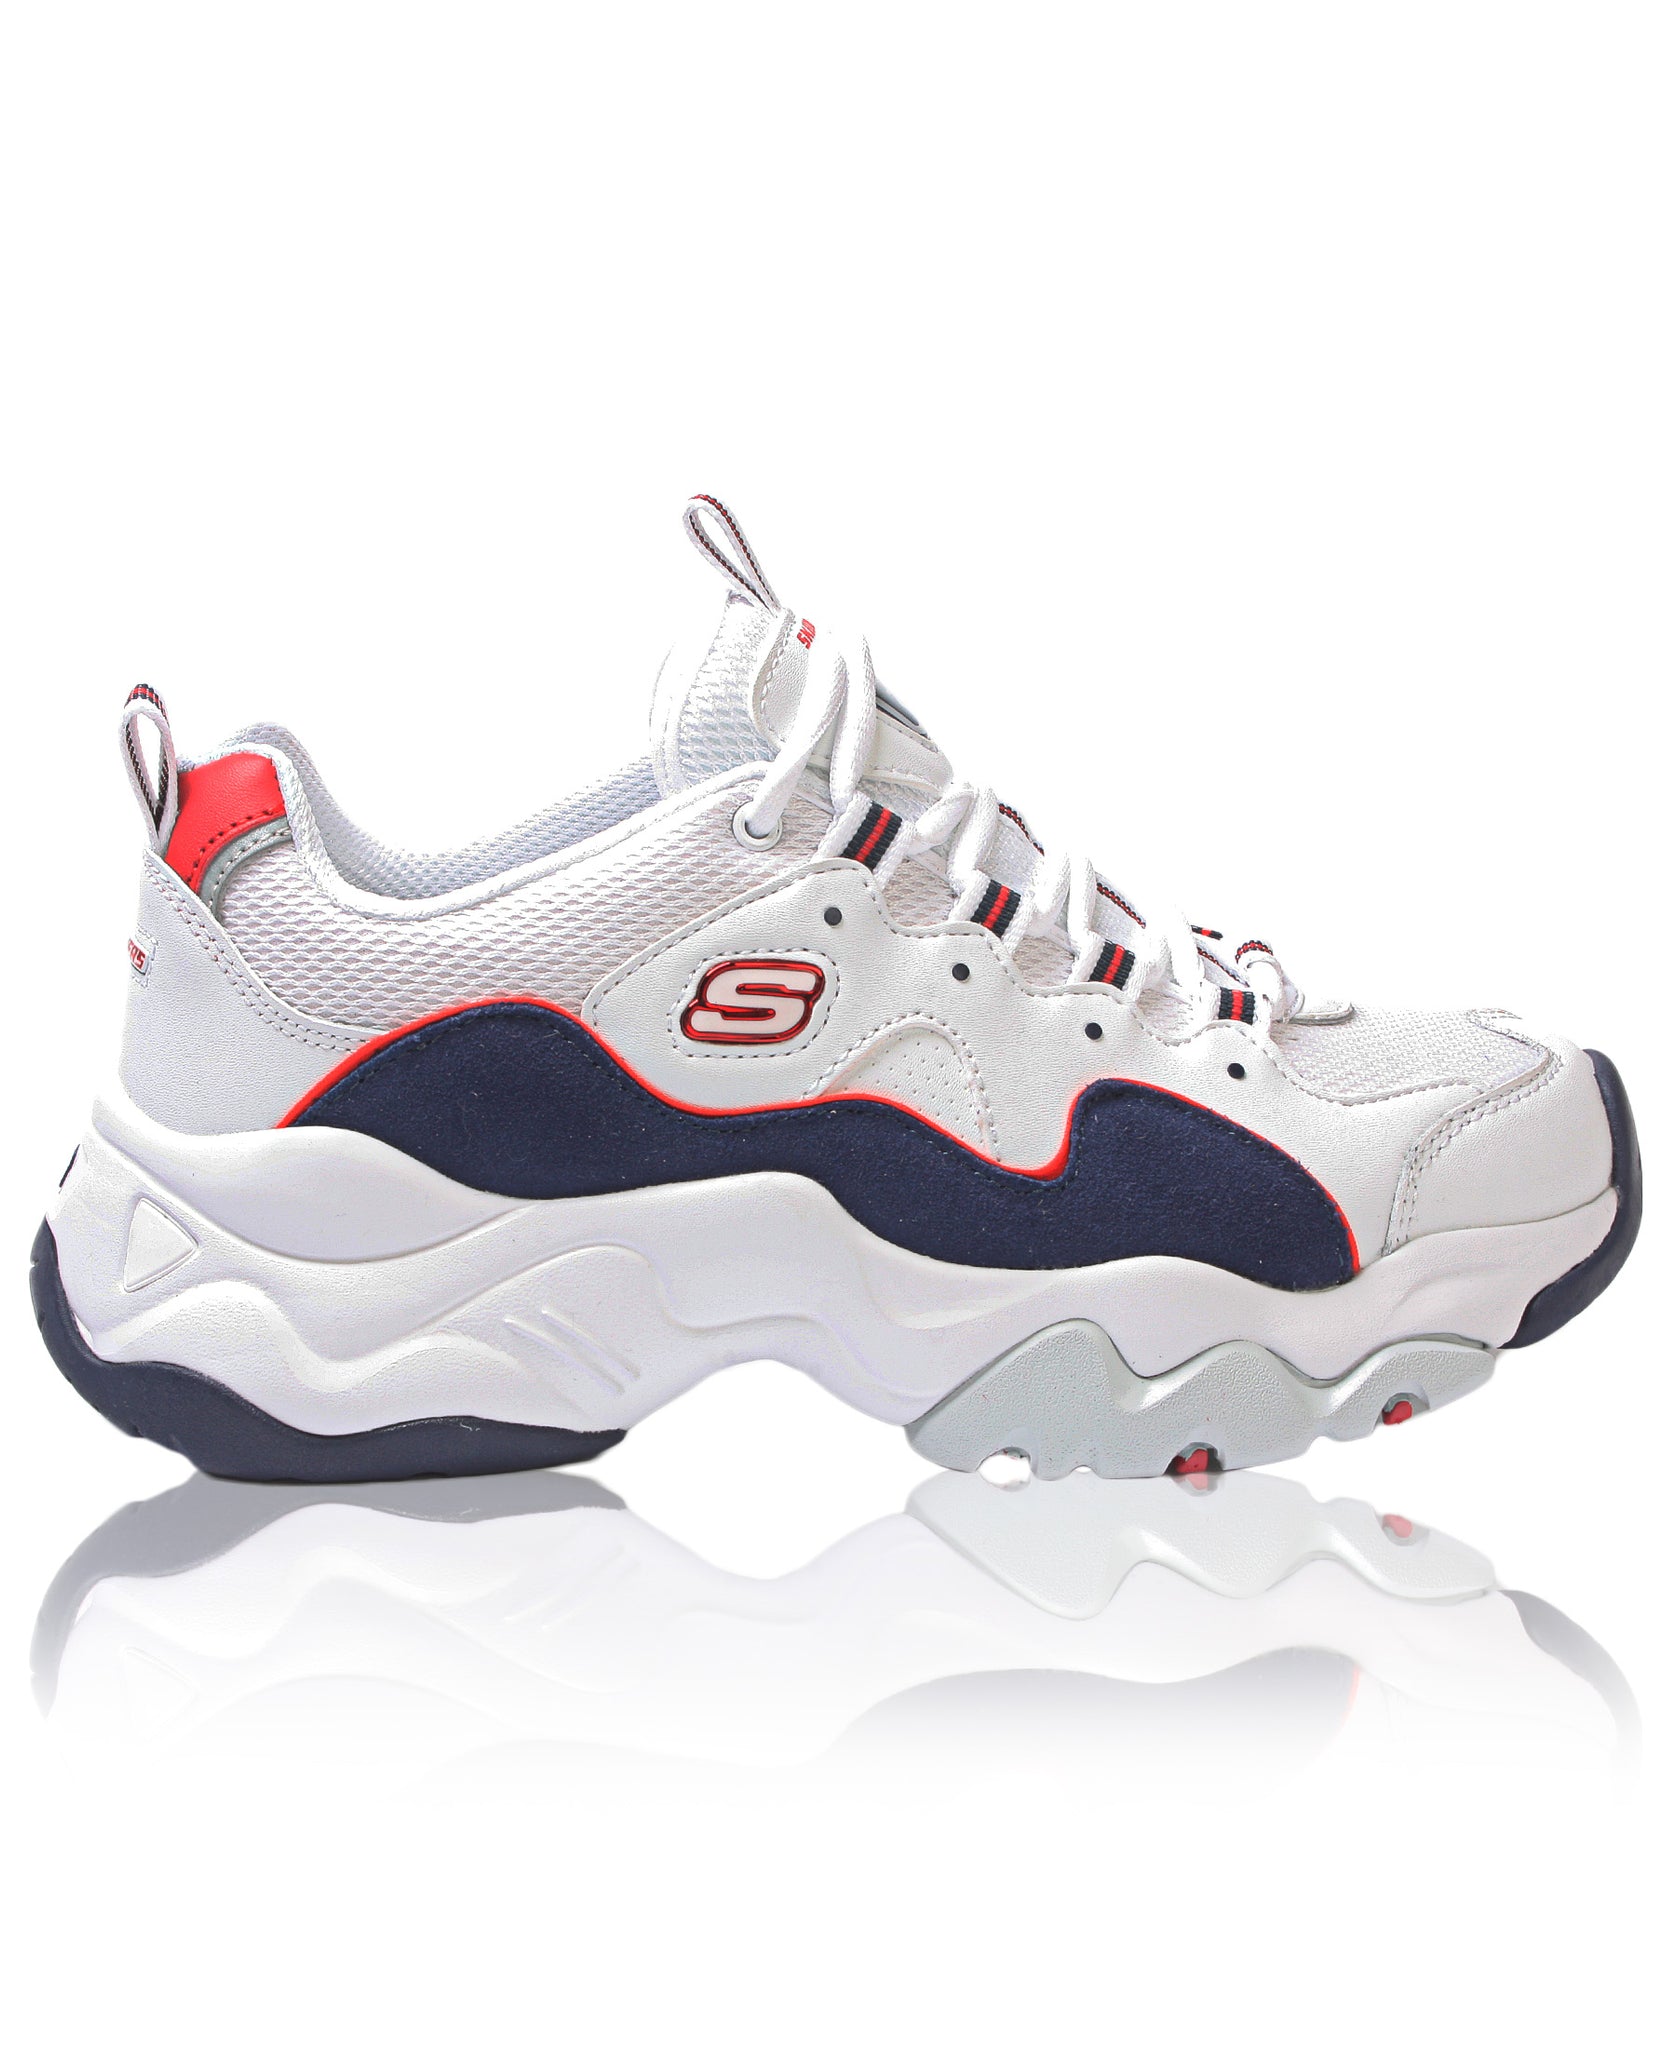 skechers shoes online south africa off 